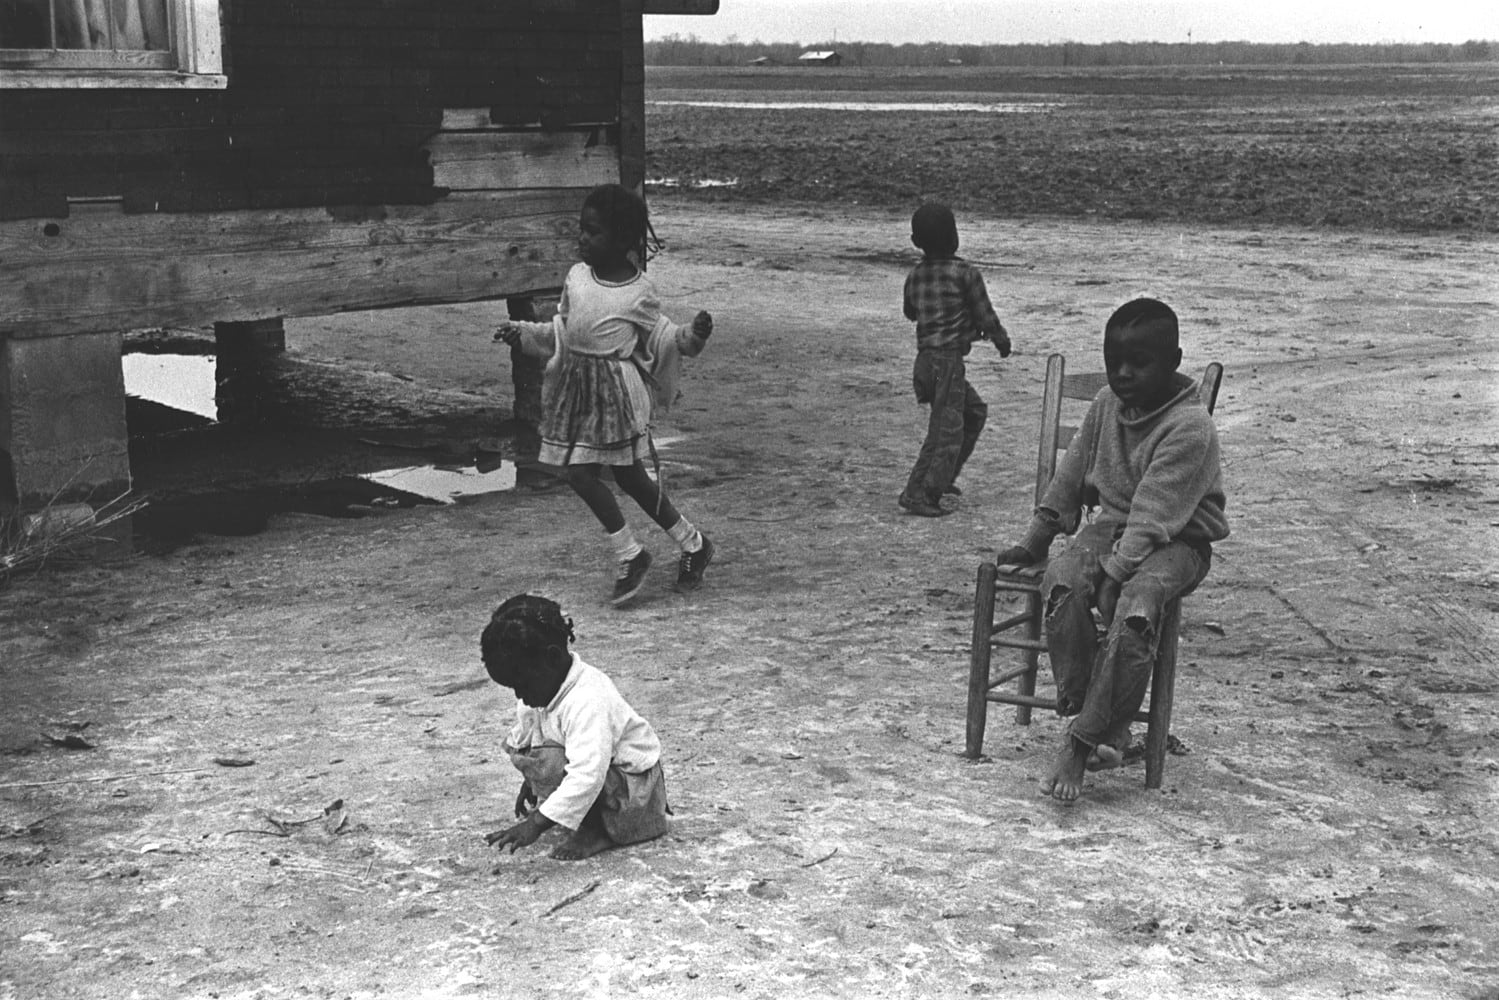 Constantine Manos, Untitled, Sharecroppers, South Carolina 21 prints PLACEHOLDER, 1965